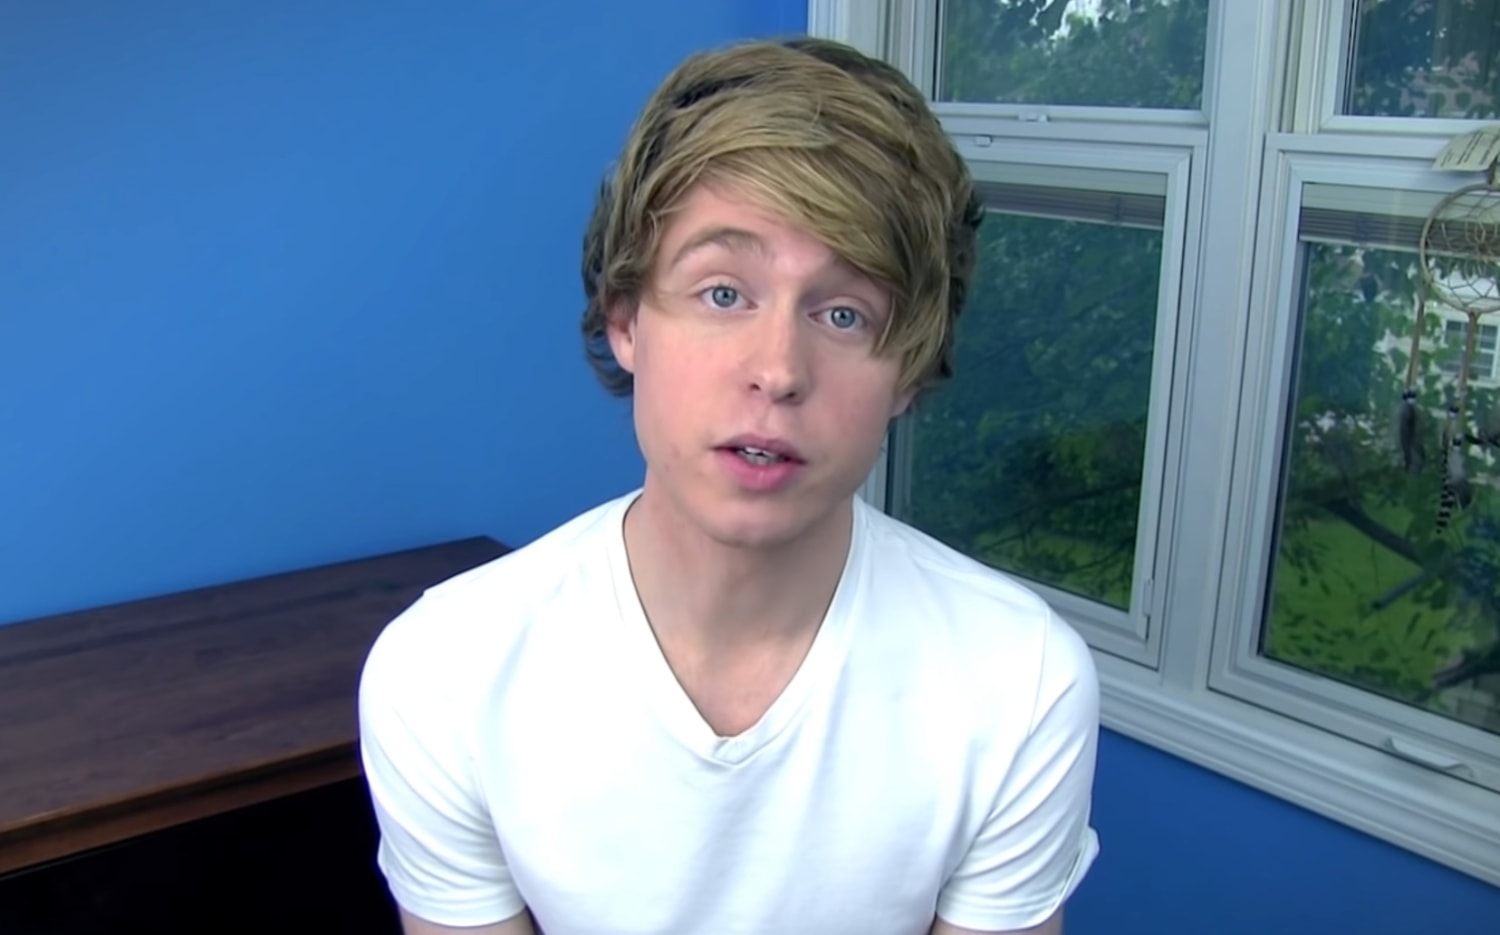 YouTube star Austin Jones pleads guilty to child porn charge